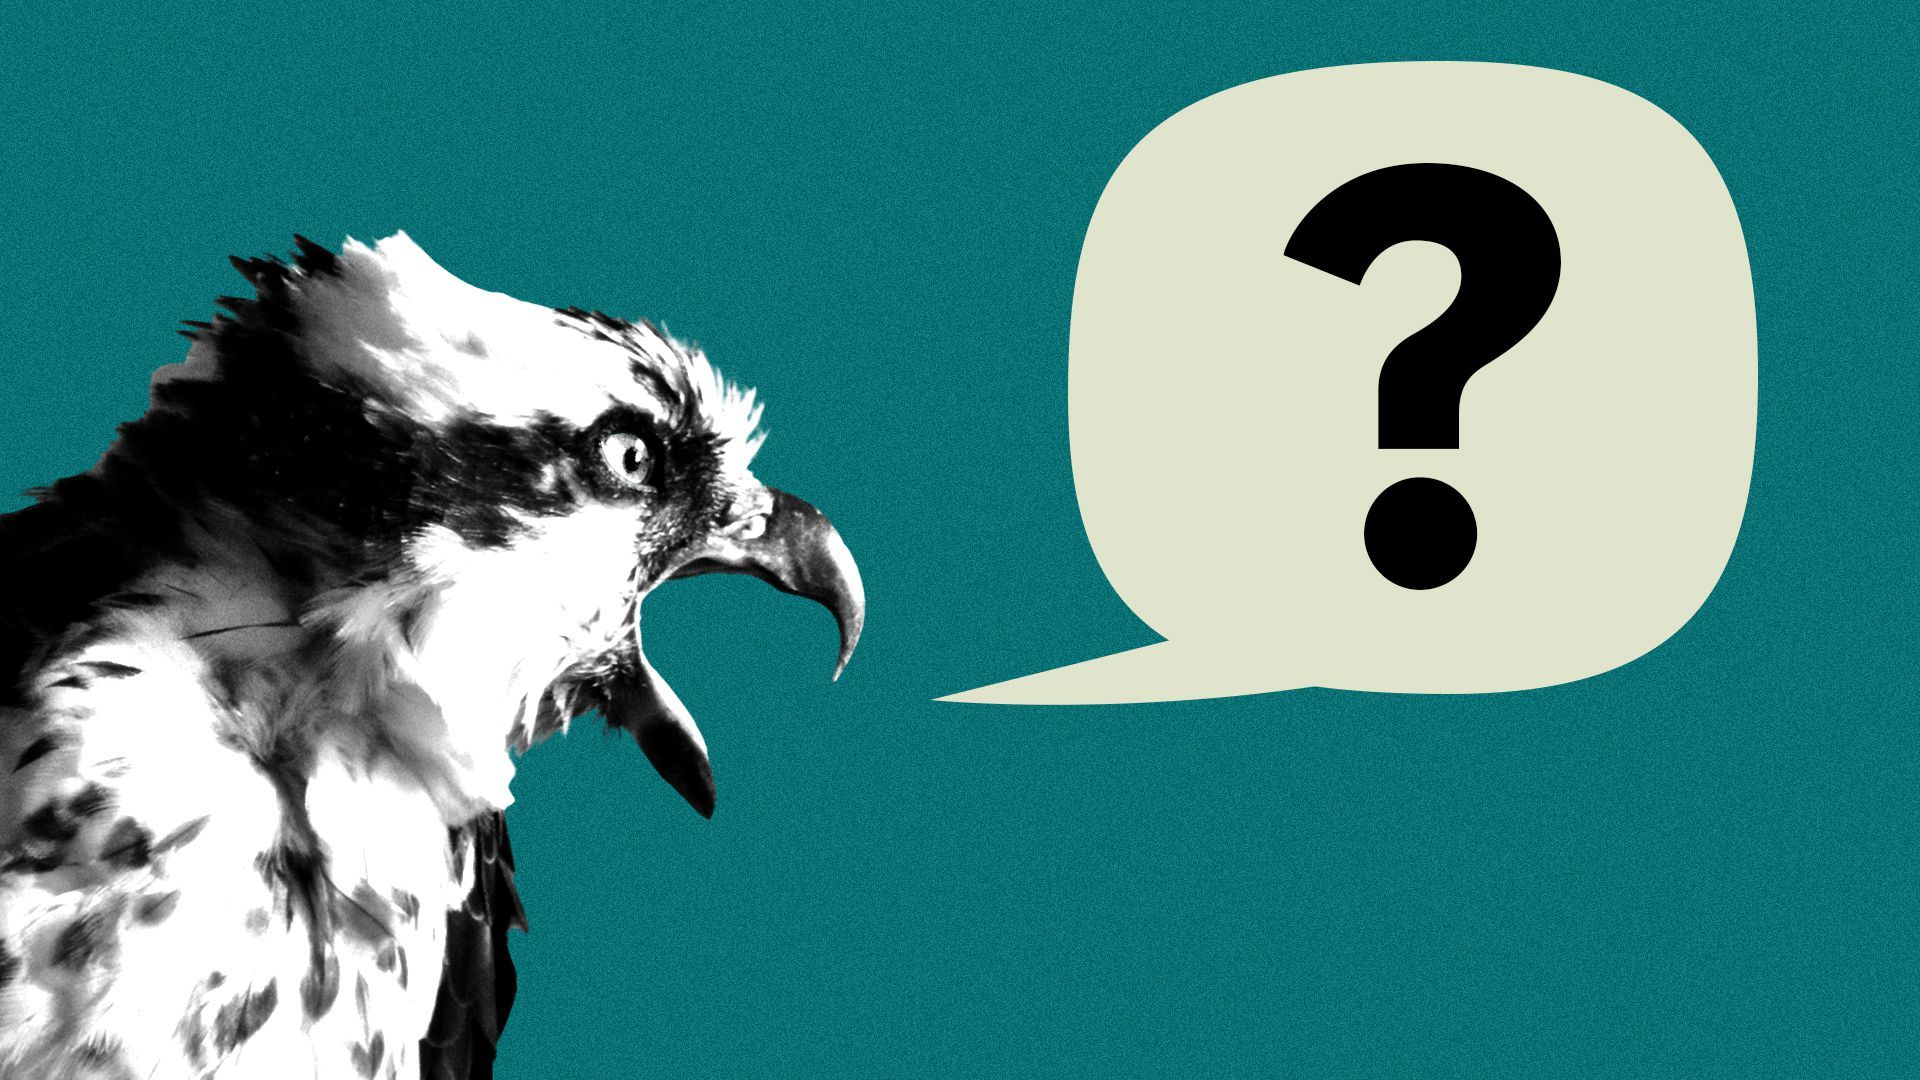 Illustration of an osprey with a word balloon with a question mark in it coming out of its mouth.